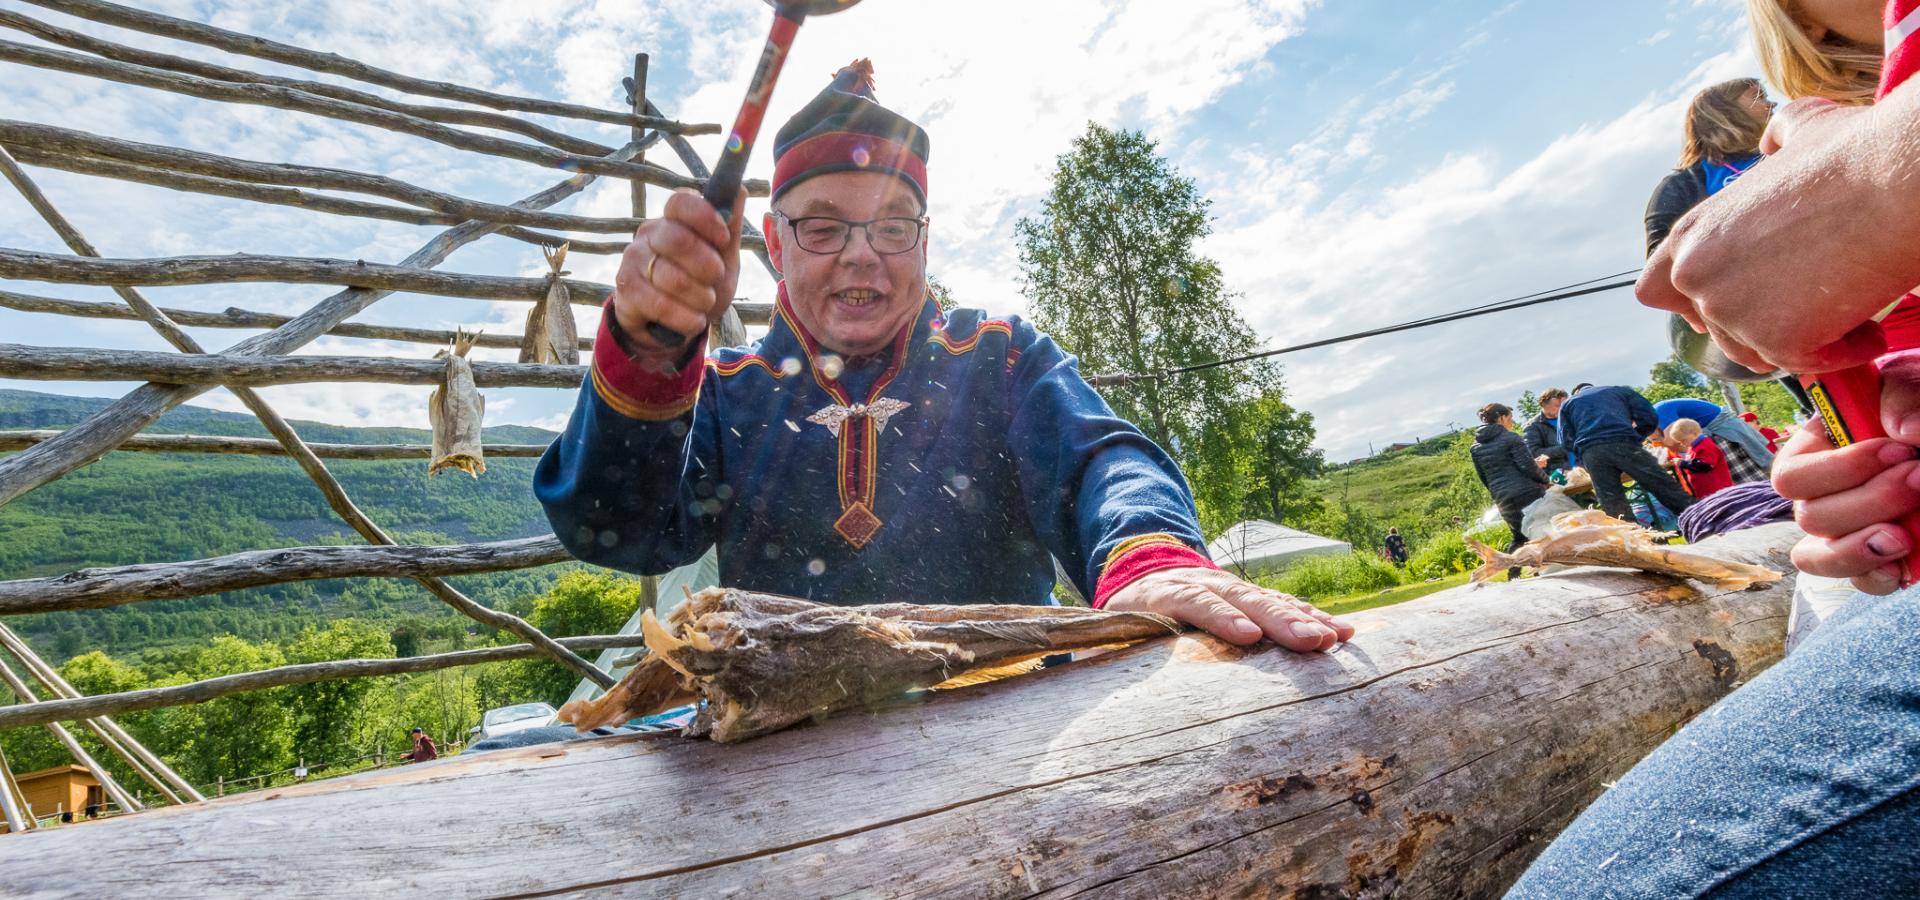 Hammering dried fish, wearing a sami suit